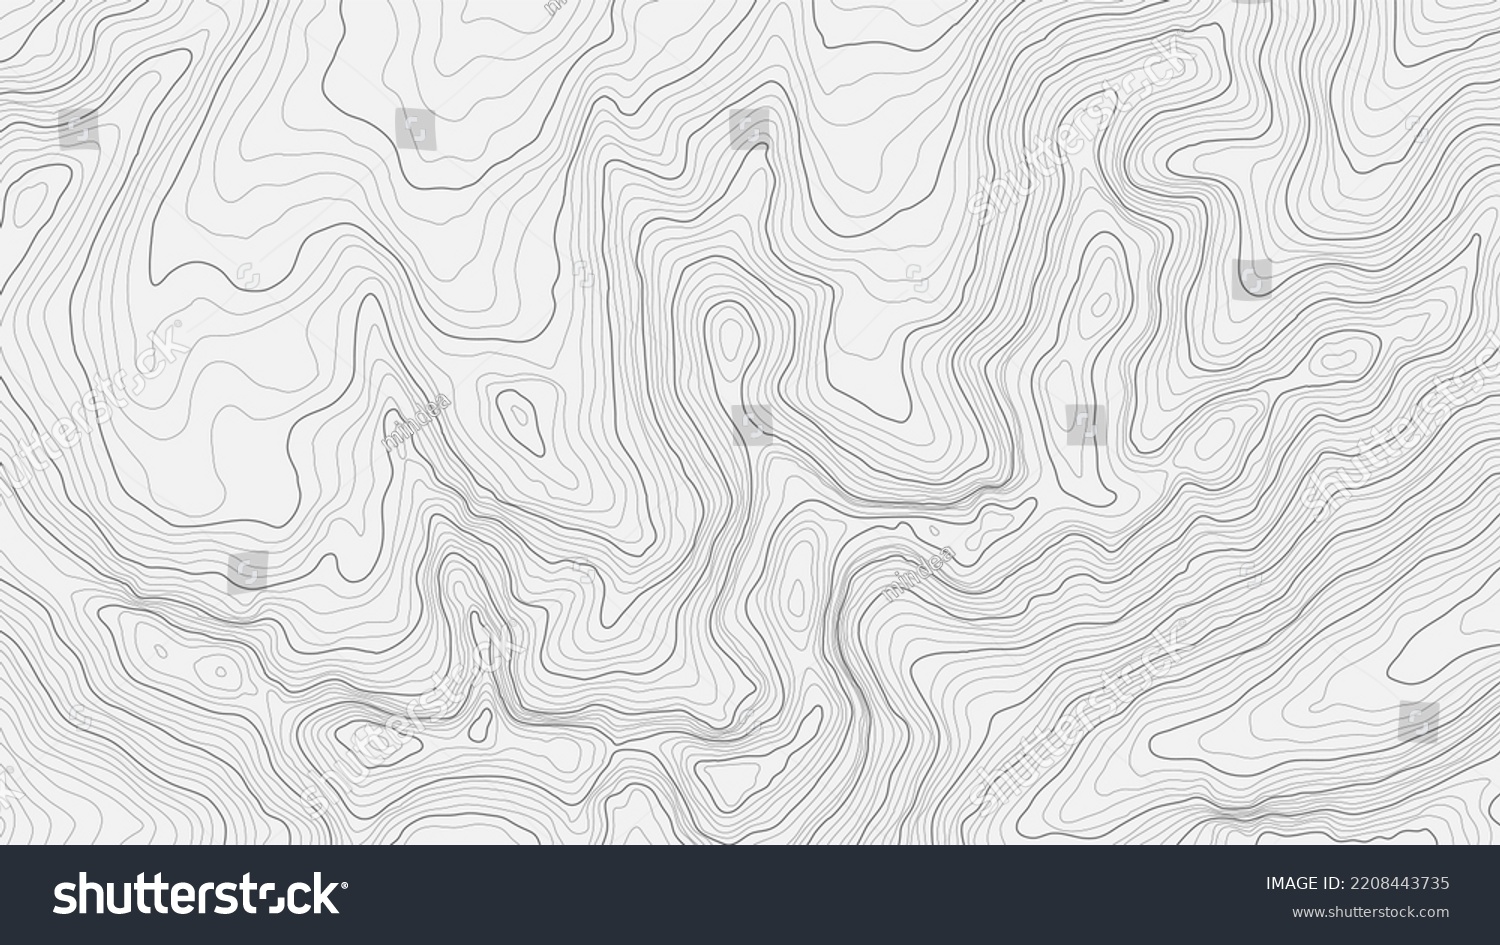 SVG of Fully editable and scalable vector illustration of topographic map on a light background. Great as an abstract background. svg